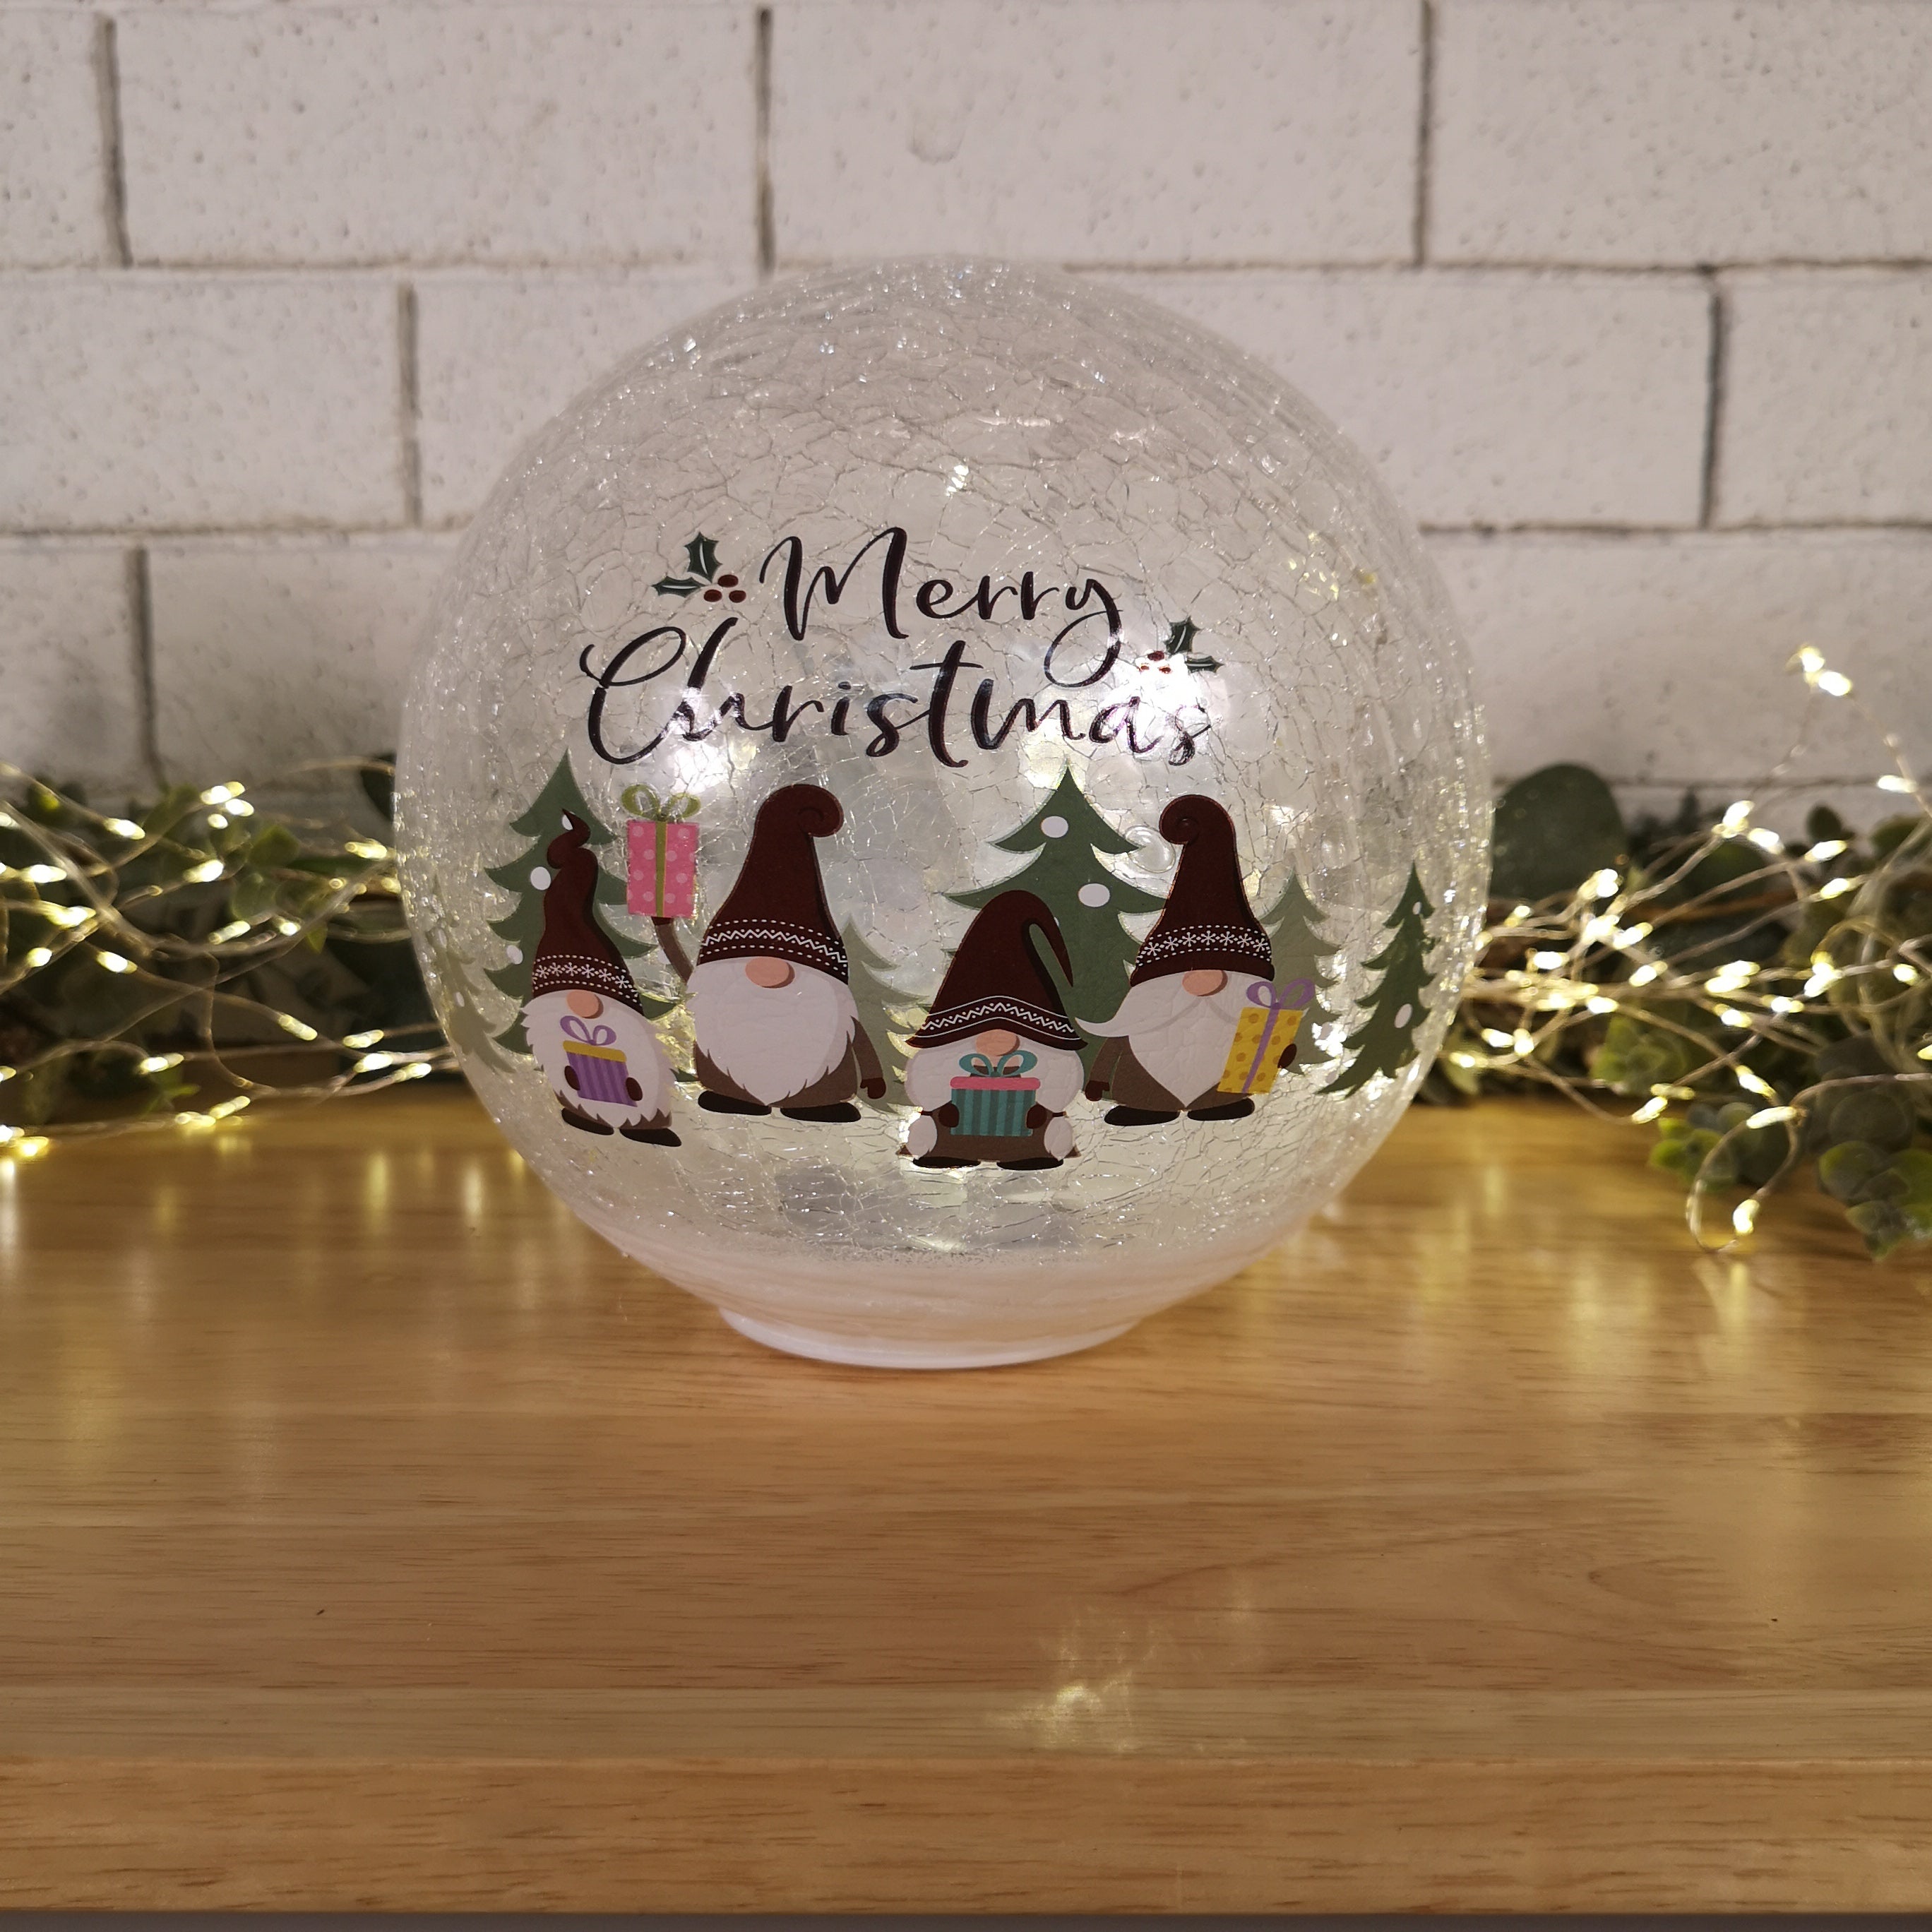 20cm Battery Operated Twinkling Warm White LED Crackle Effect Ball Christmas Decoration with Gonks